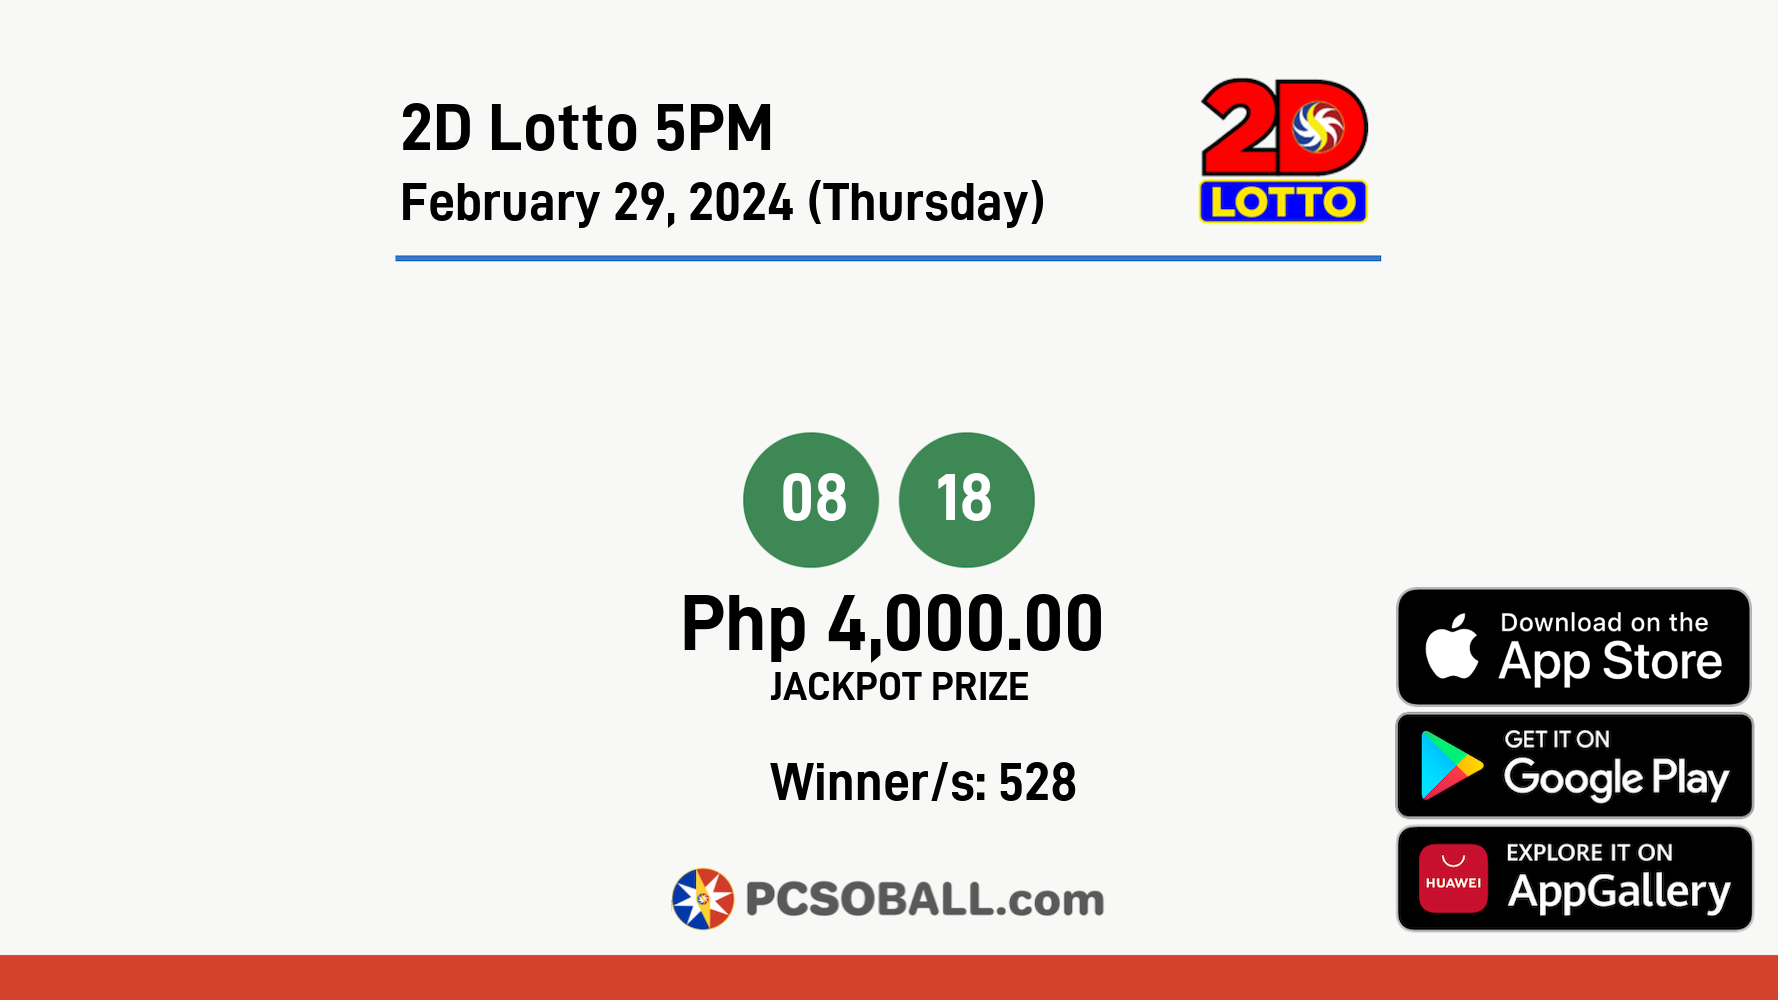 2D Lotto 5PM February 29, 2024 (Thursday) Result